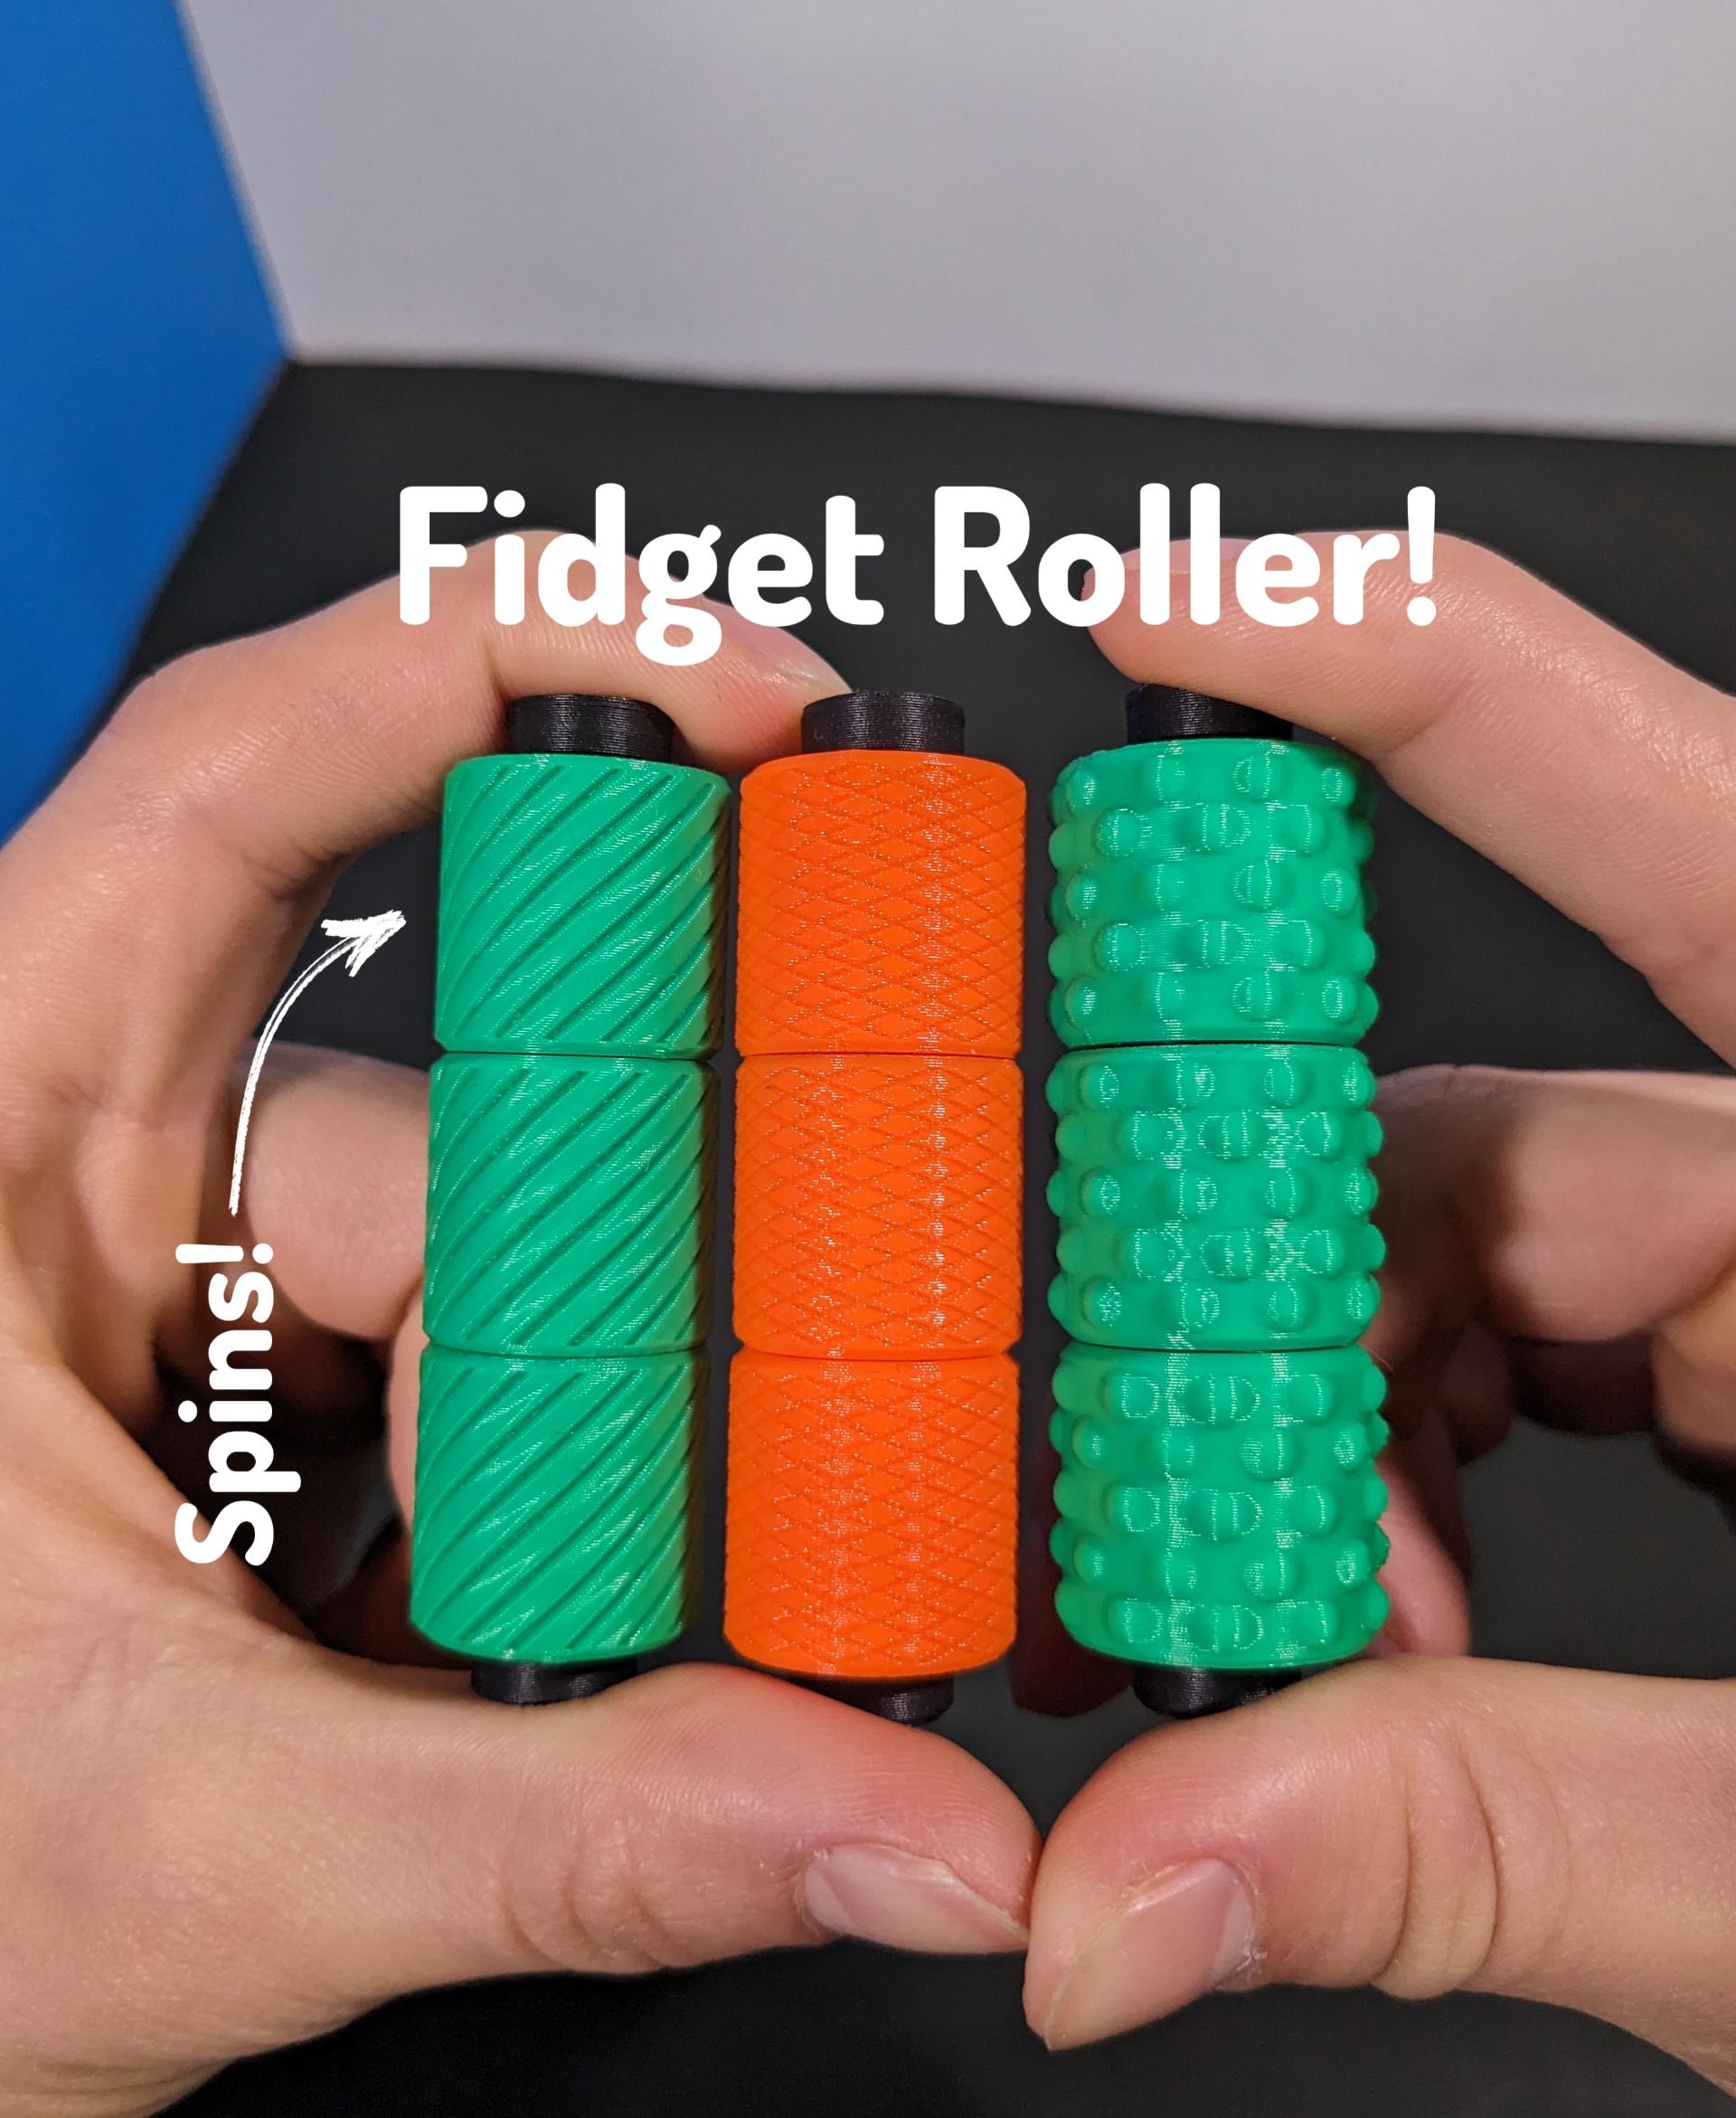 Spinner Fidget Toy - The Fidget Roller 3! - 3 Types - 3D model by DR 3D  on Thangs